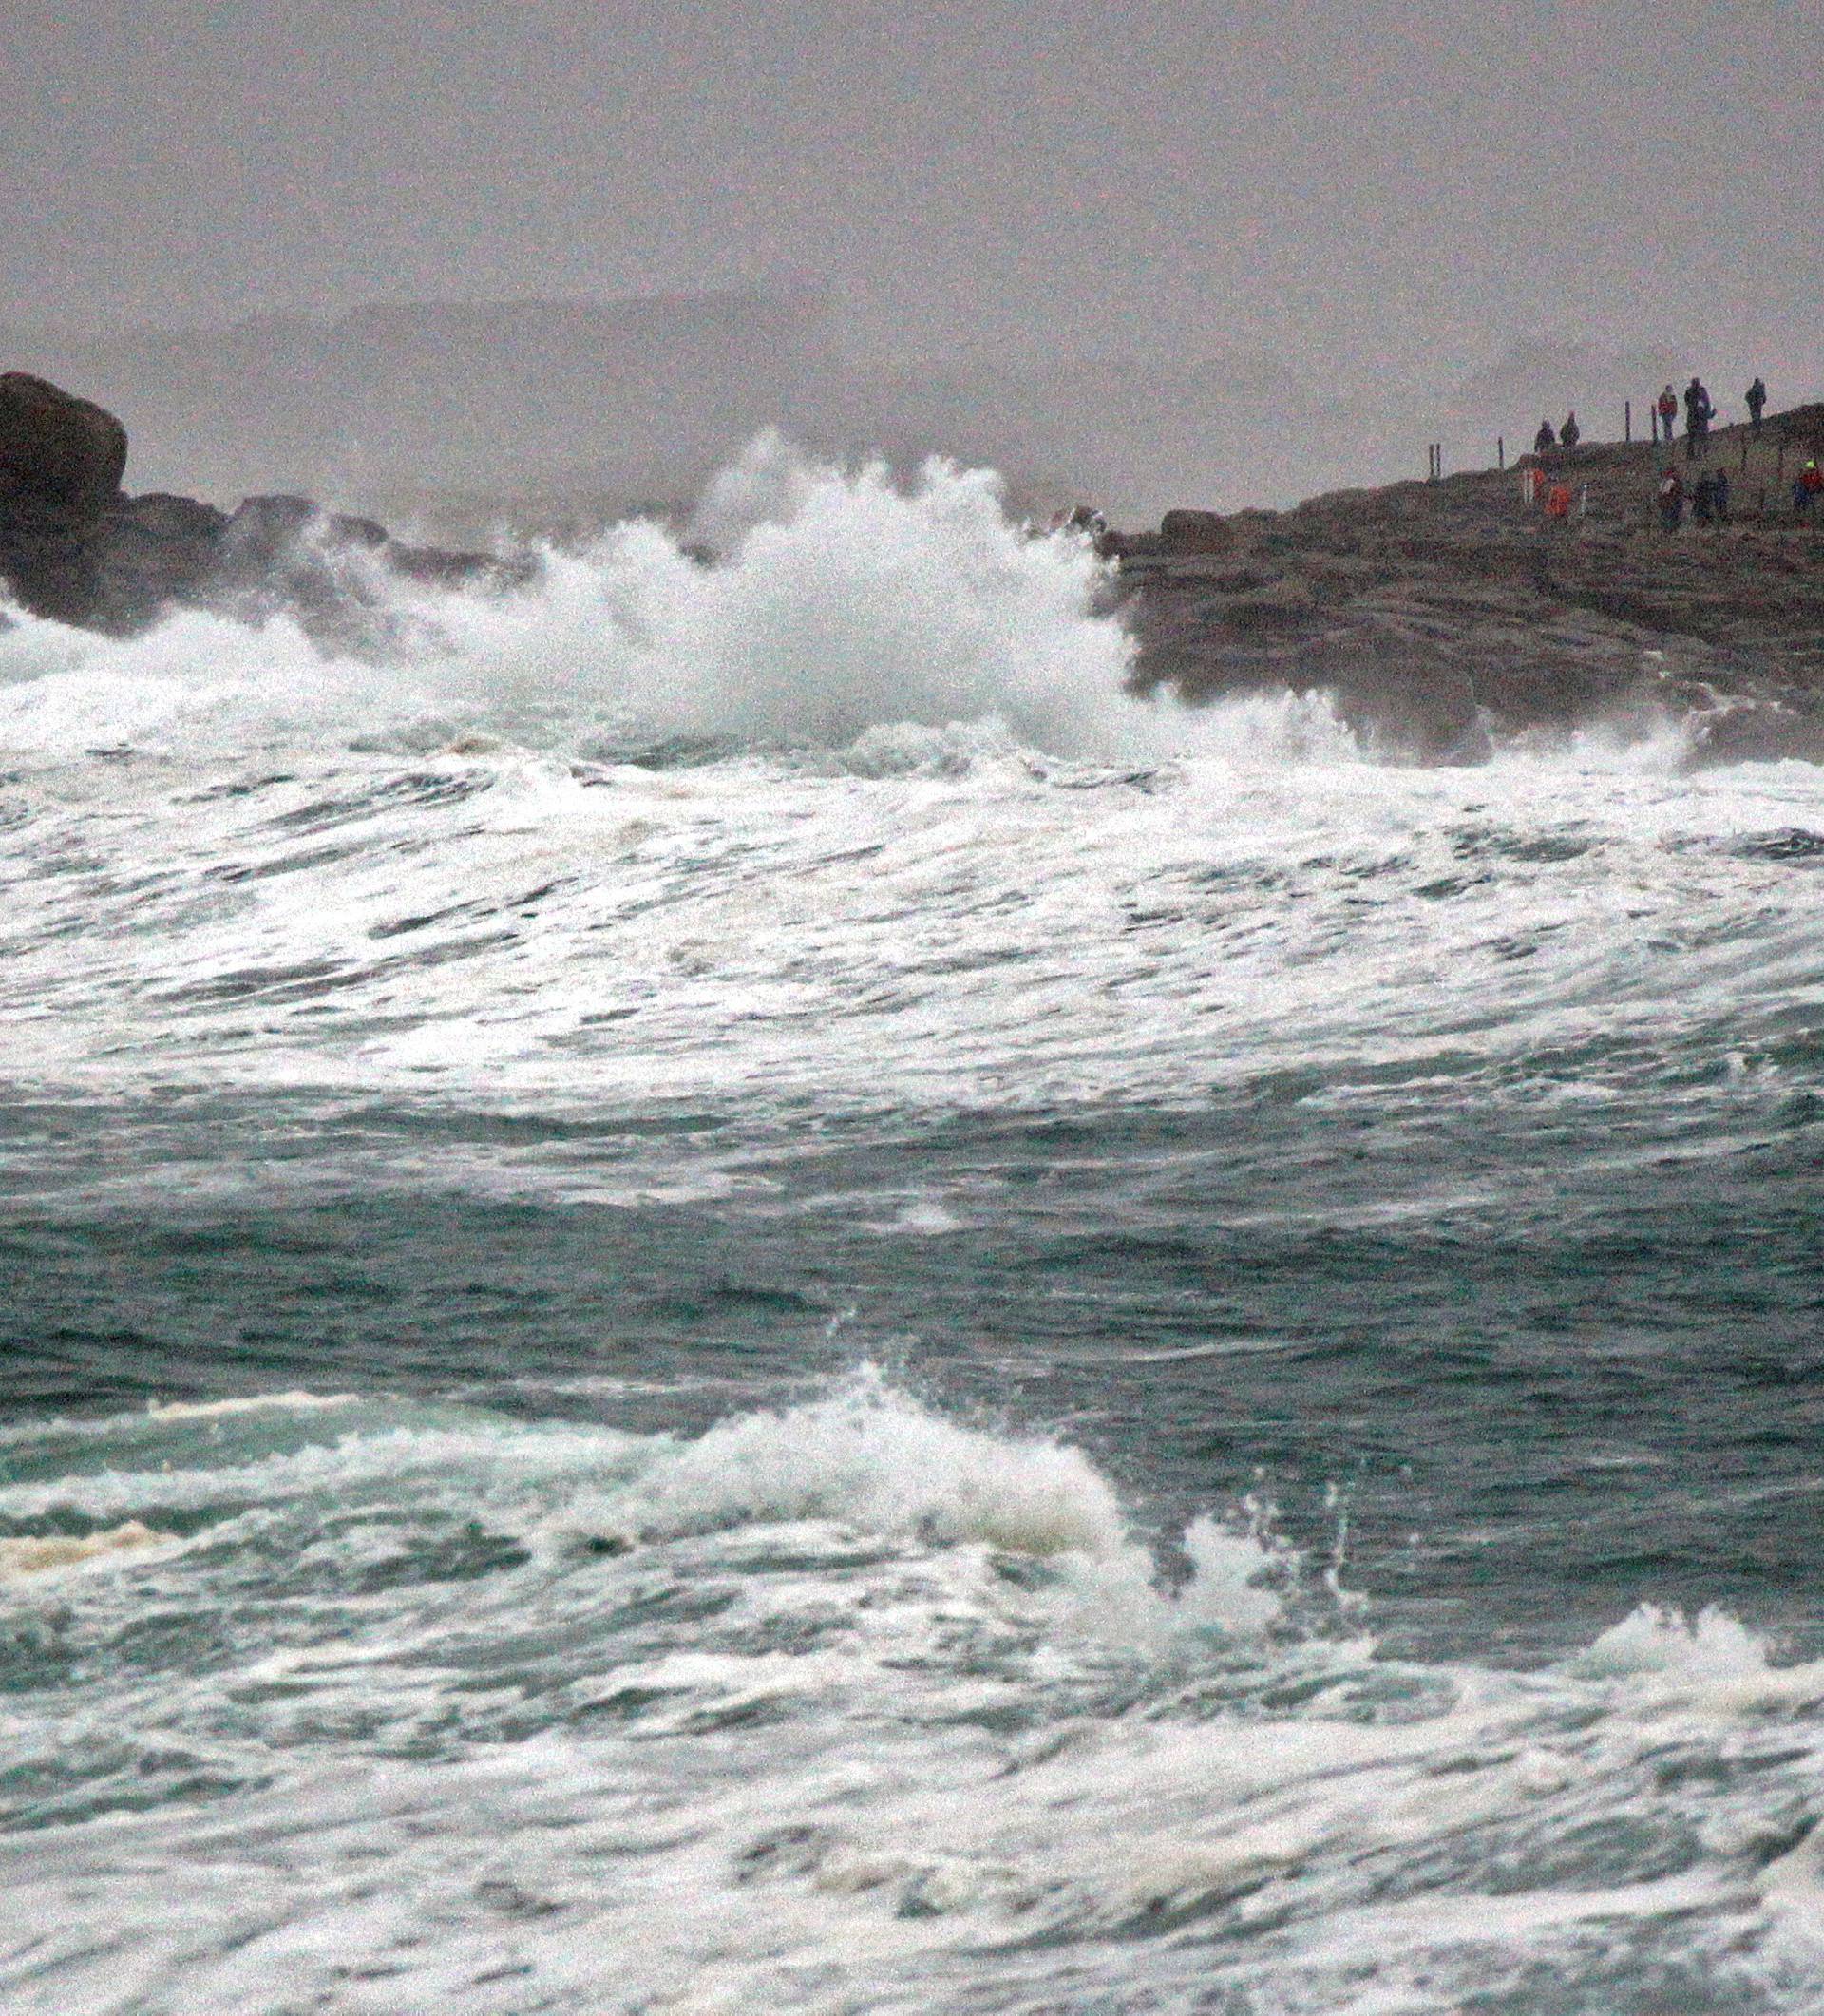 People standing on the Pointe de la Torch peninsula watch waves breaking on the Brittany coast after storm Eleanor hit Saint-Guenole